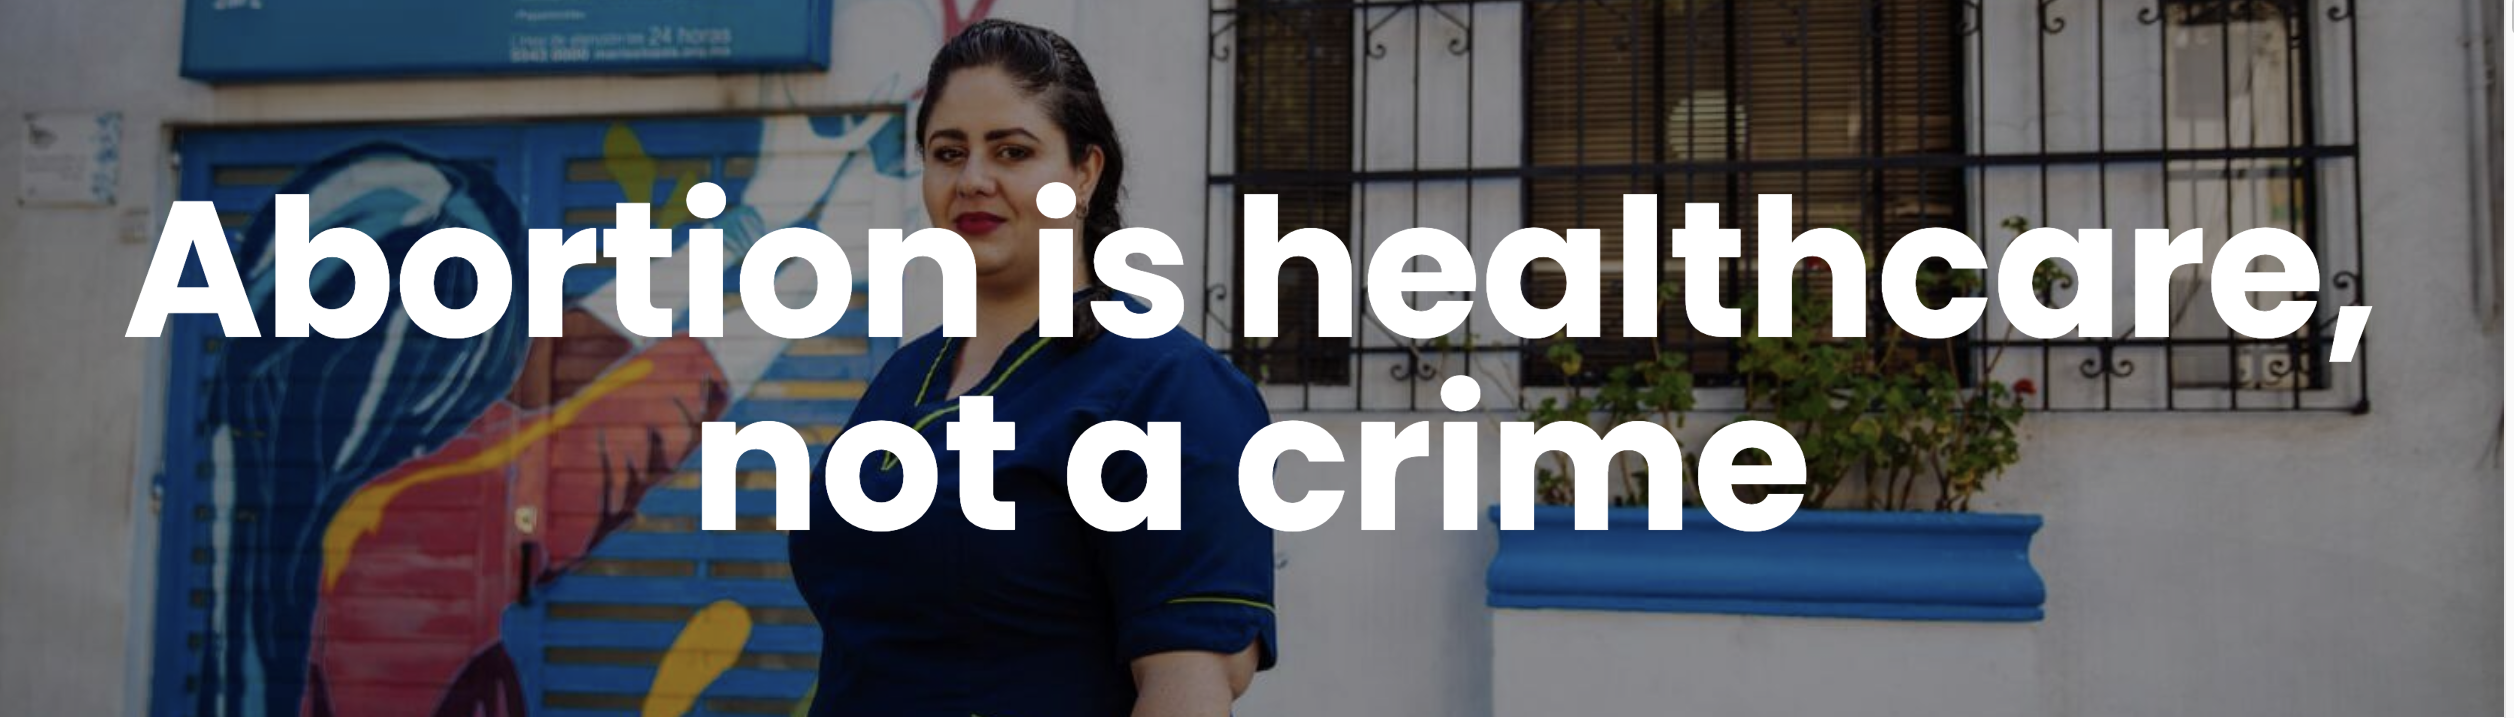 white text: abortion is healthcare not a crime, over a picture of a woman in a blue short sleeve shirt standing in front of railings and mural in a street